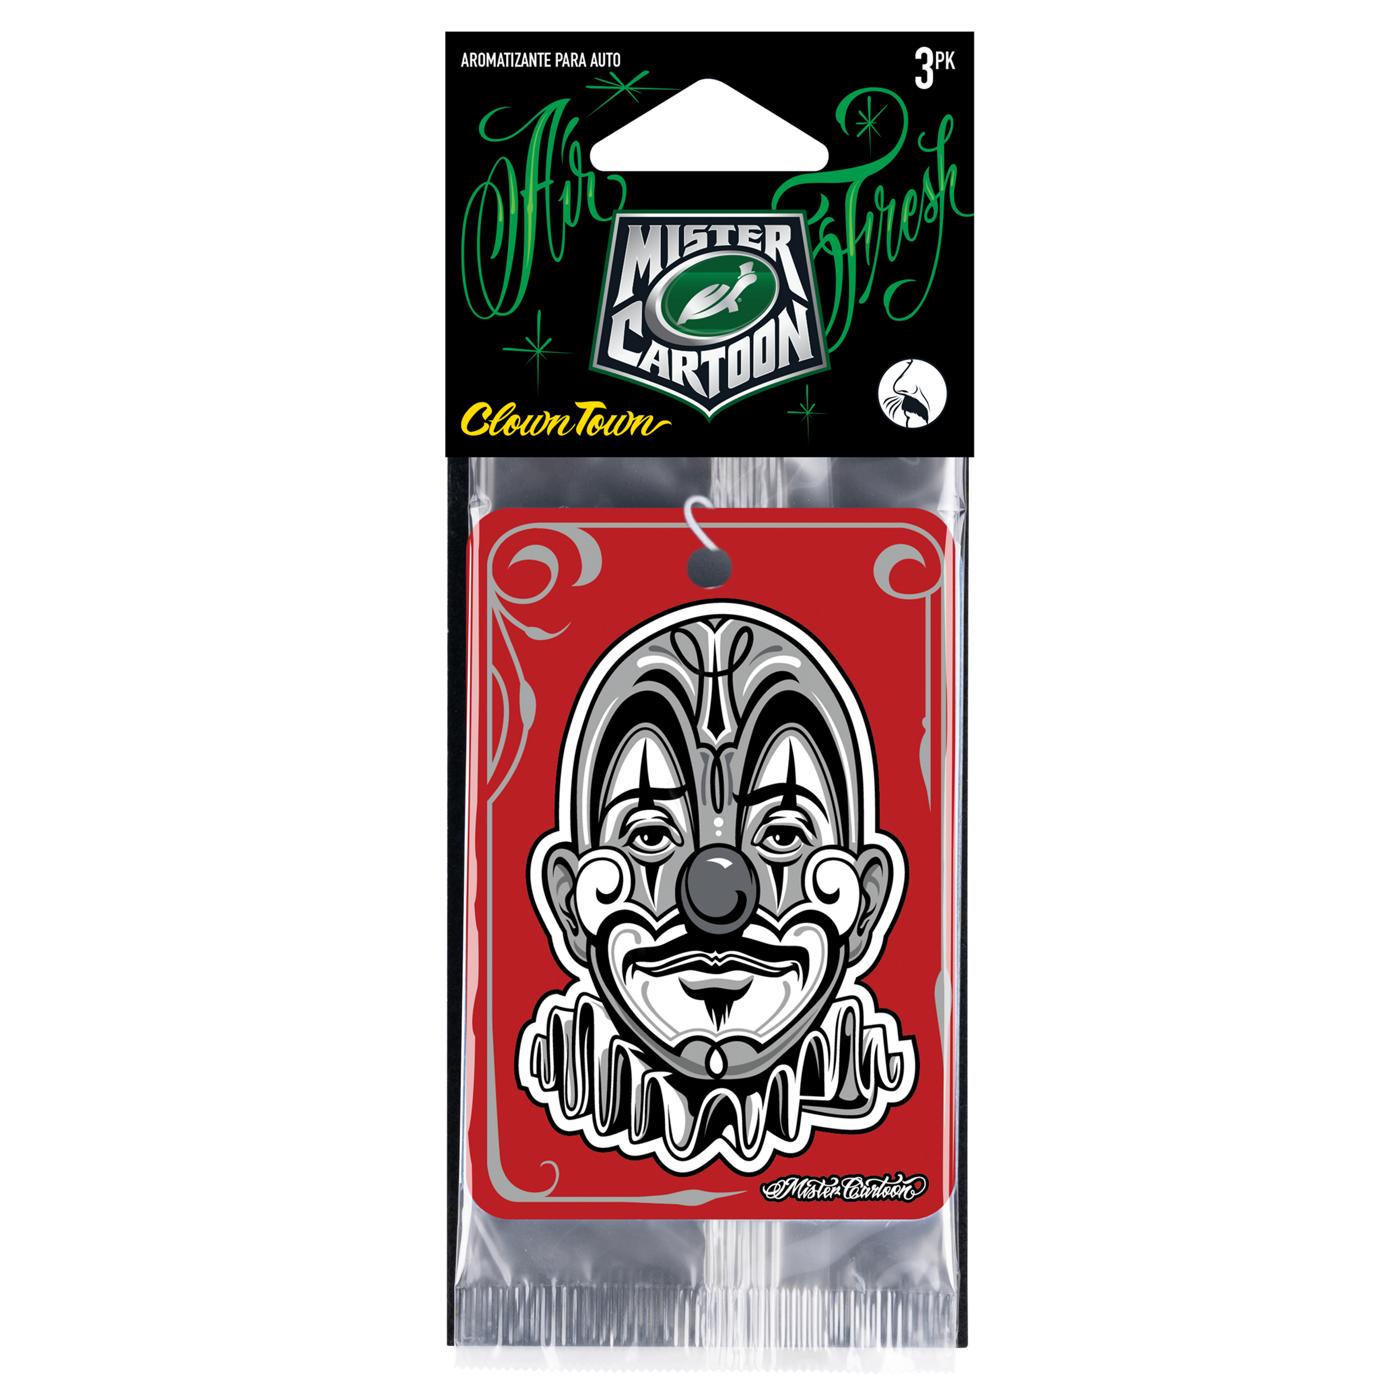 Turtle Wax Mister Cartoon Paper Air Fresheners - Clown Town; image 1 of 2